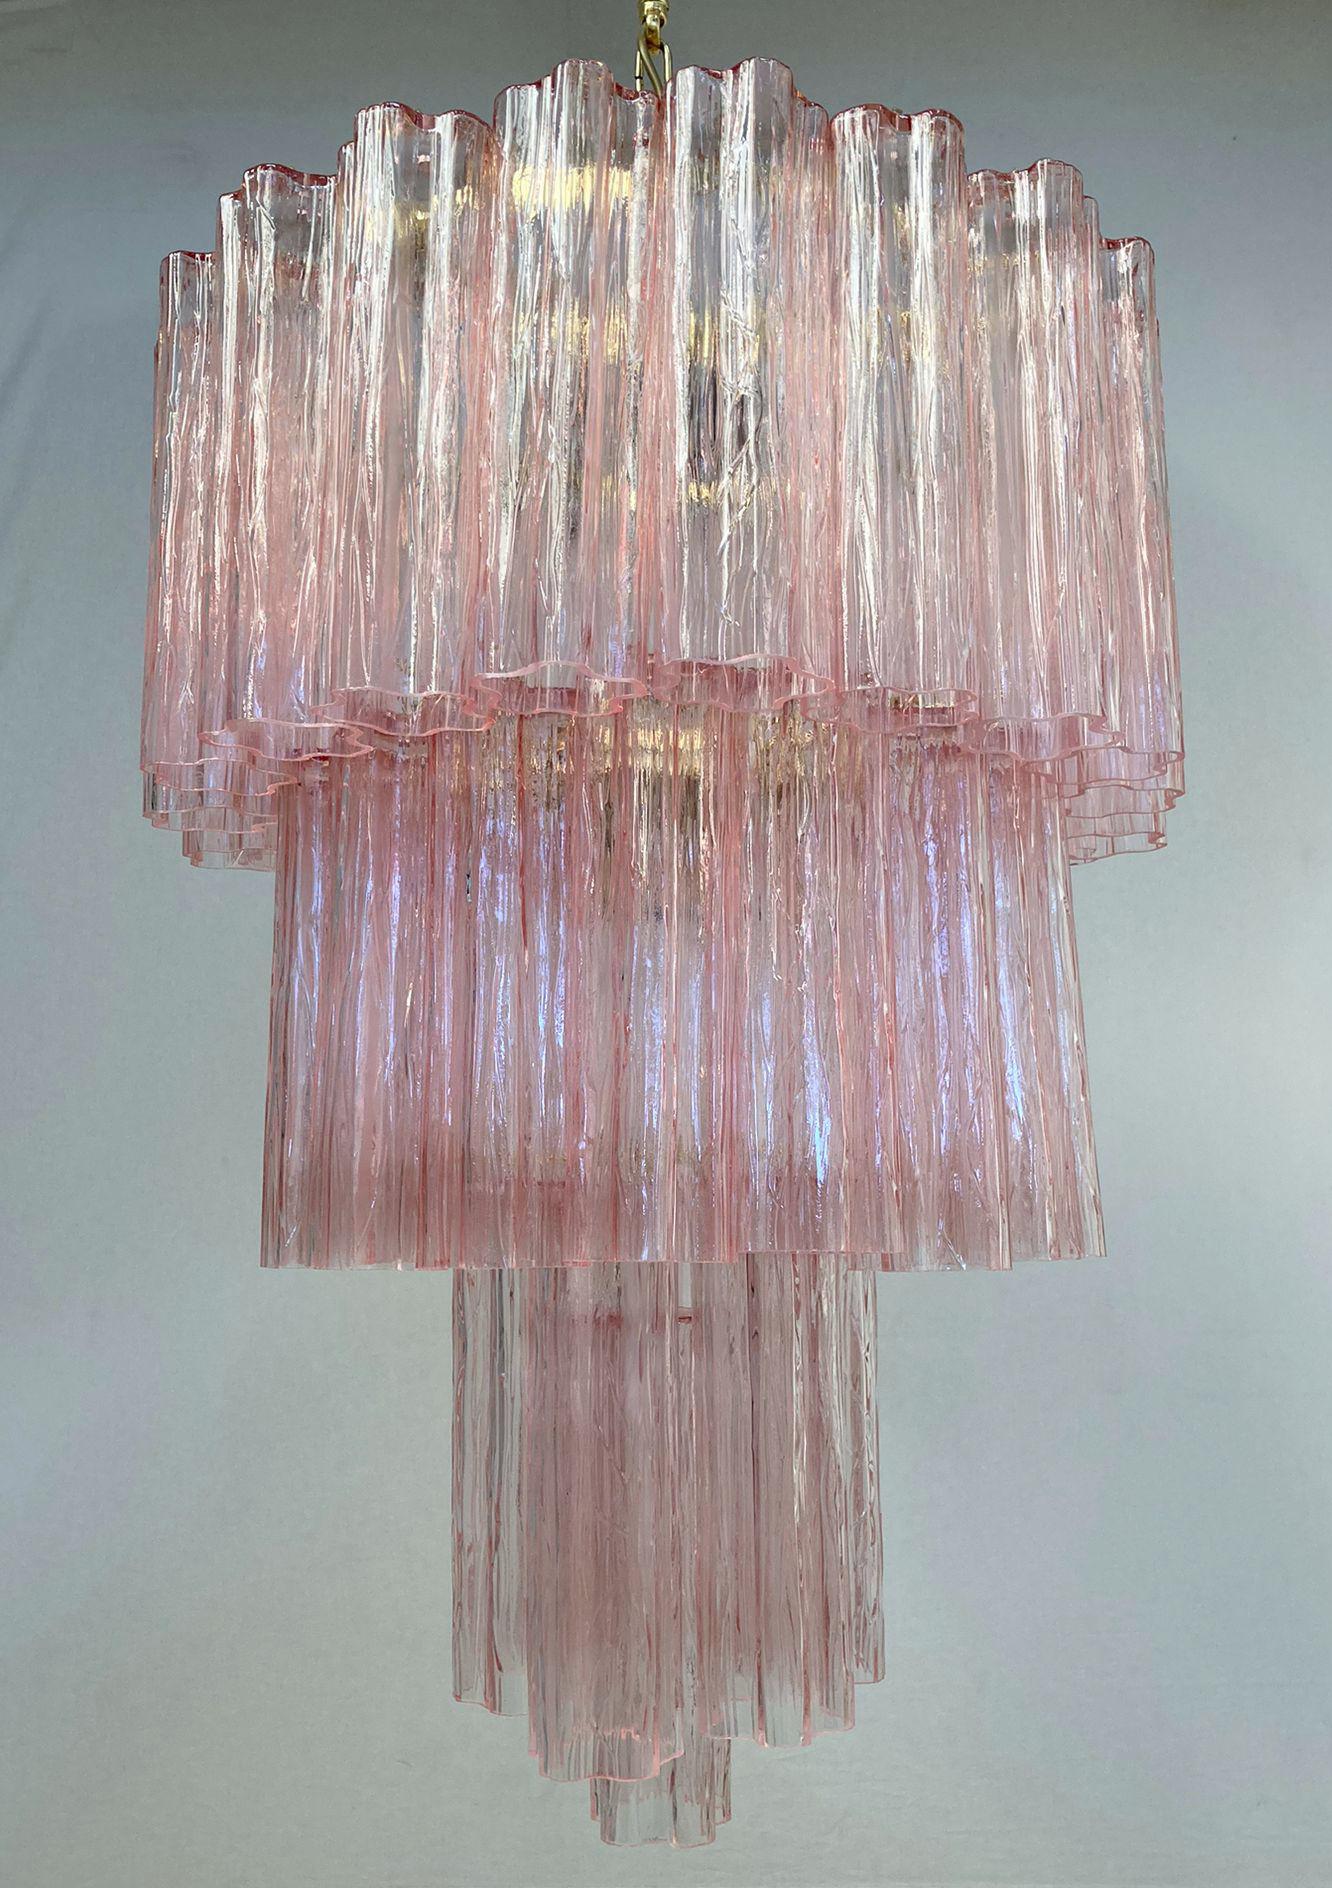 Vintage Italian chandelier with pink hand blown Murano Tronchi glasses arranged in 3 tiers, mounted on brass frame / Made in Italy circa 1960s
4 lights / E26 or E27 type / max 60W each 
Measures: diameter 21.5 inches, height 31.5, total height 43.5